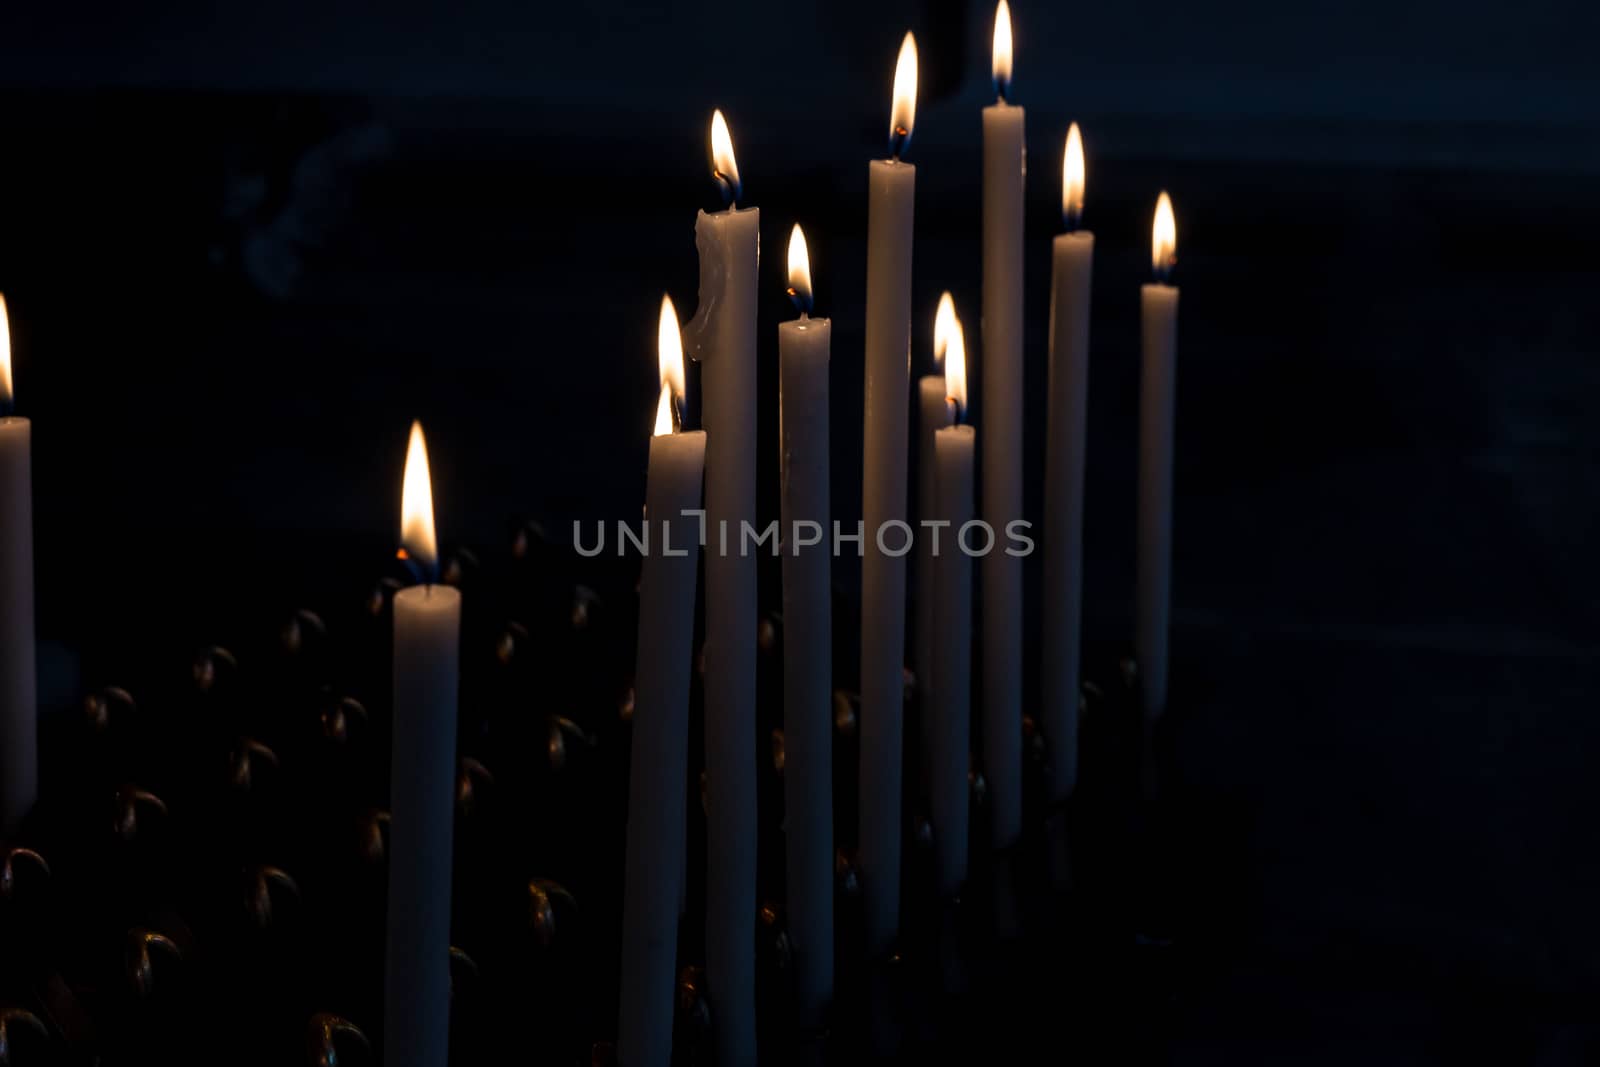 lit candles in the dark by alanstix64